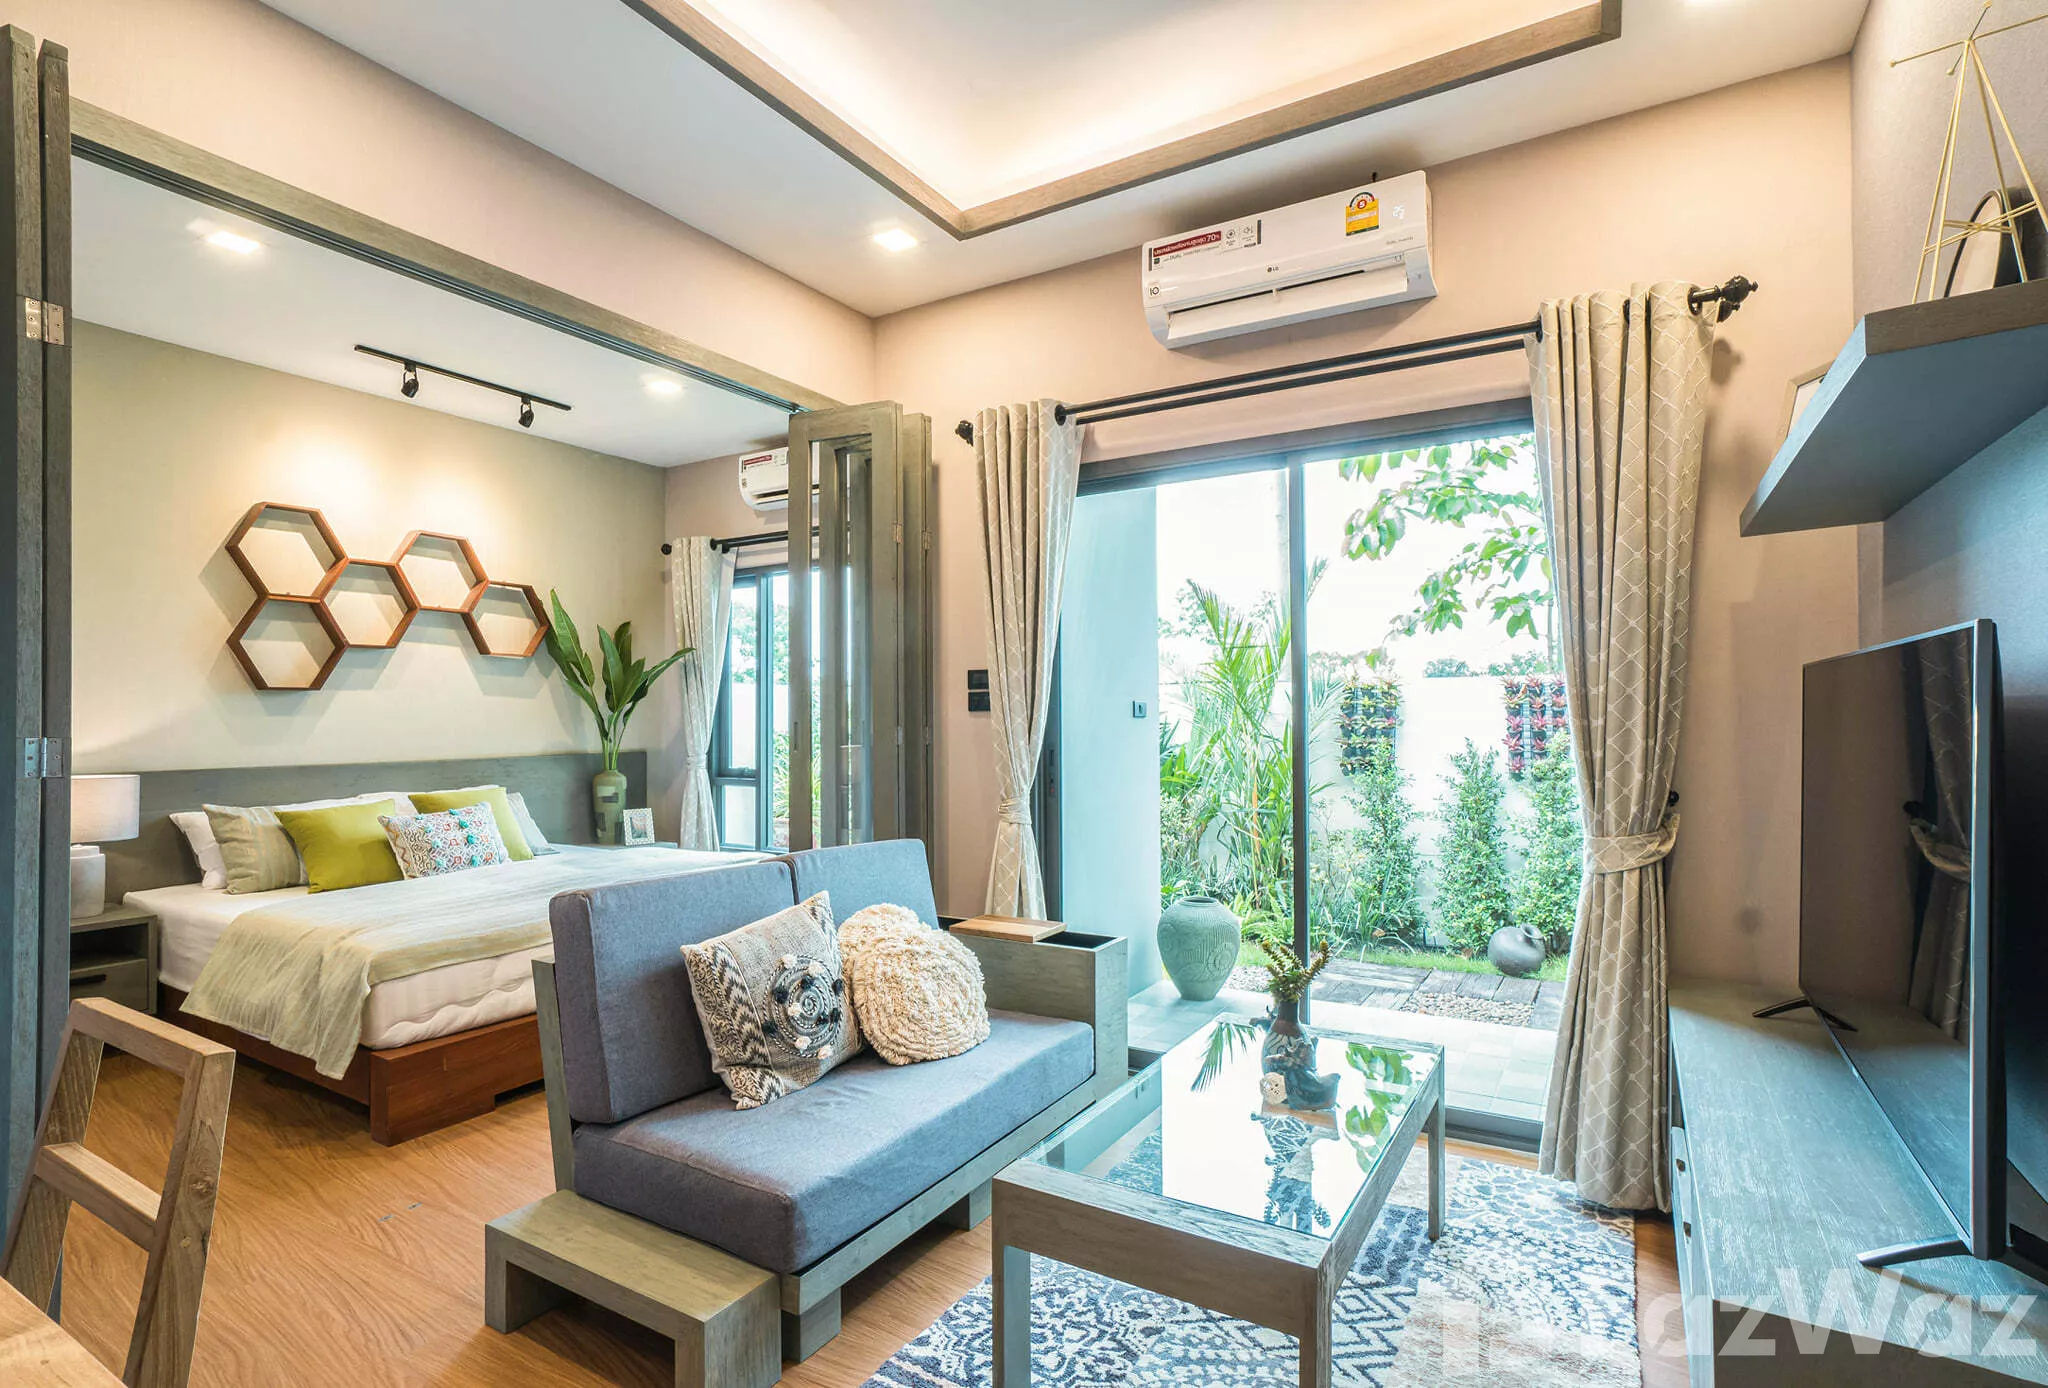 Condos you can get for under US$100,000 in Chiang Mai